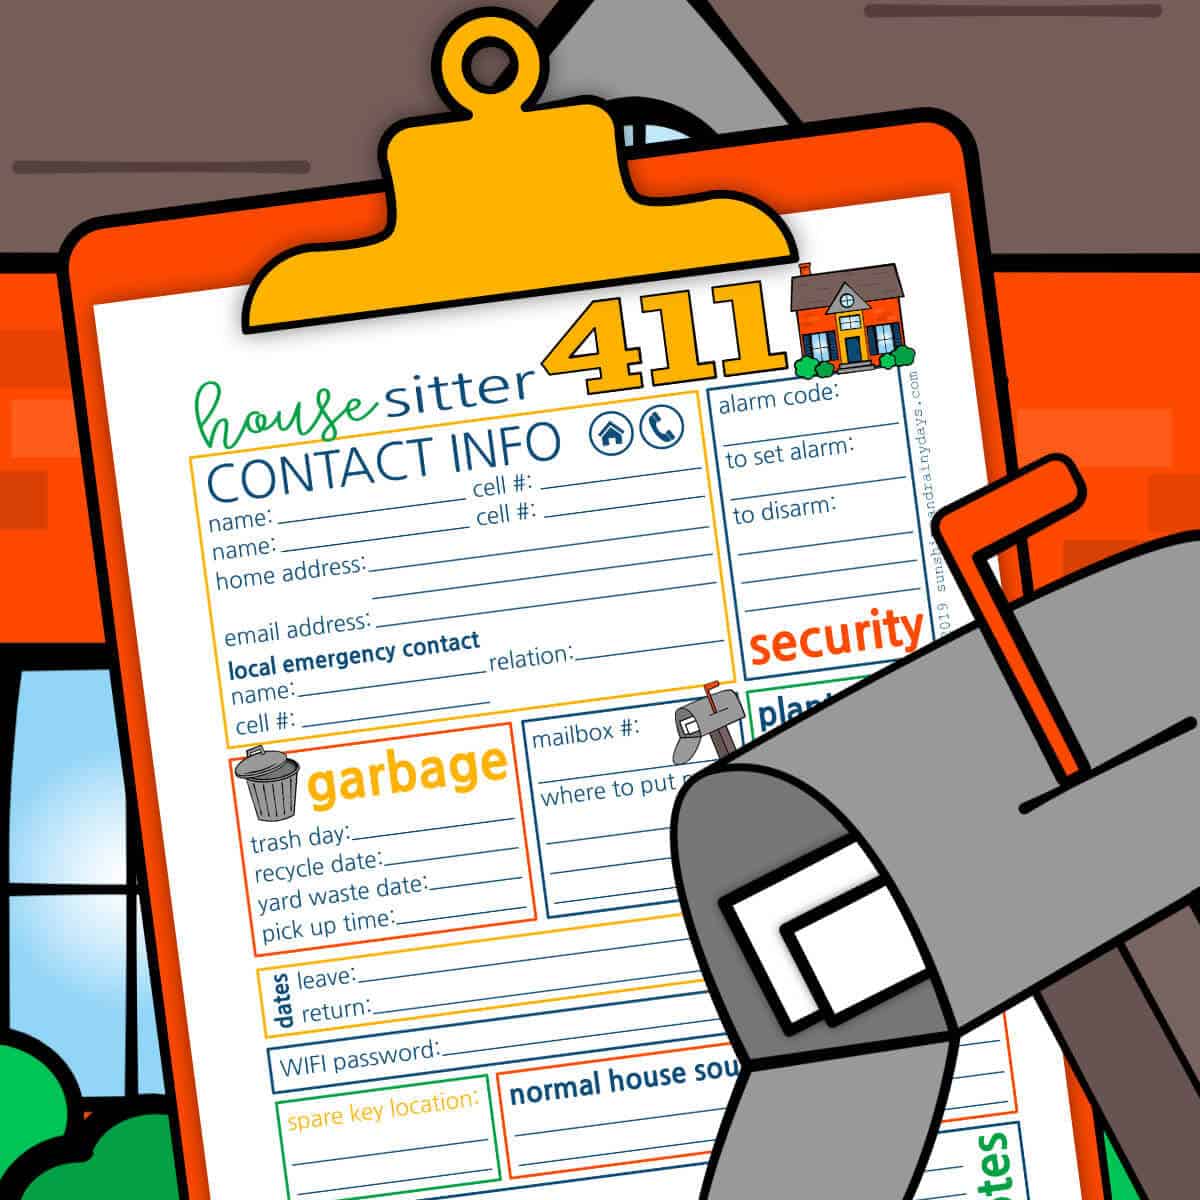 Clipart clipboard with a house sitter information sheet on it in front of a house with a mailbox.